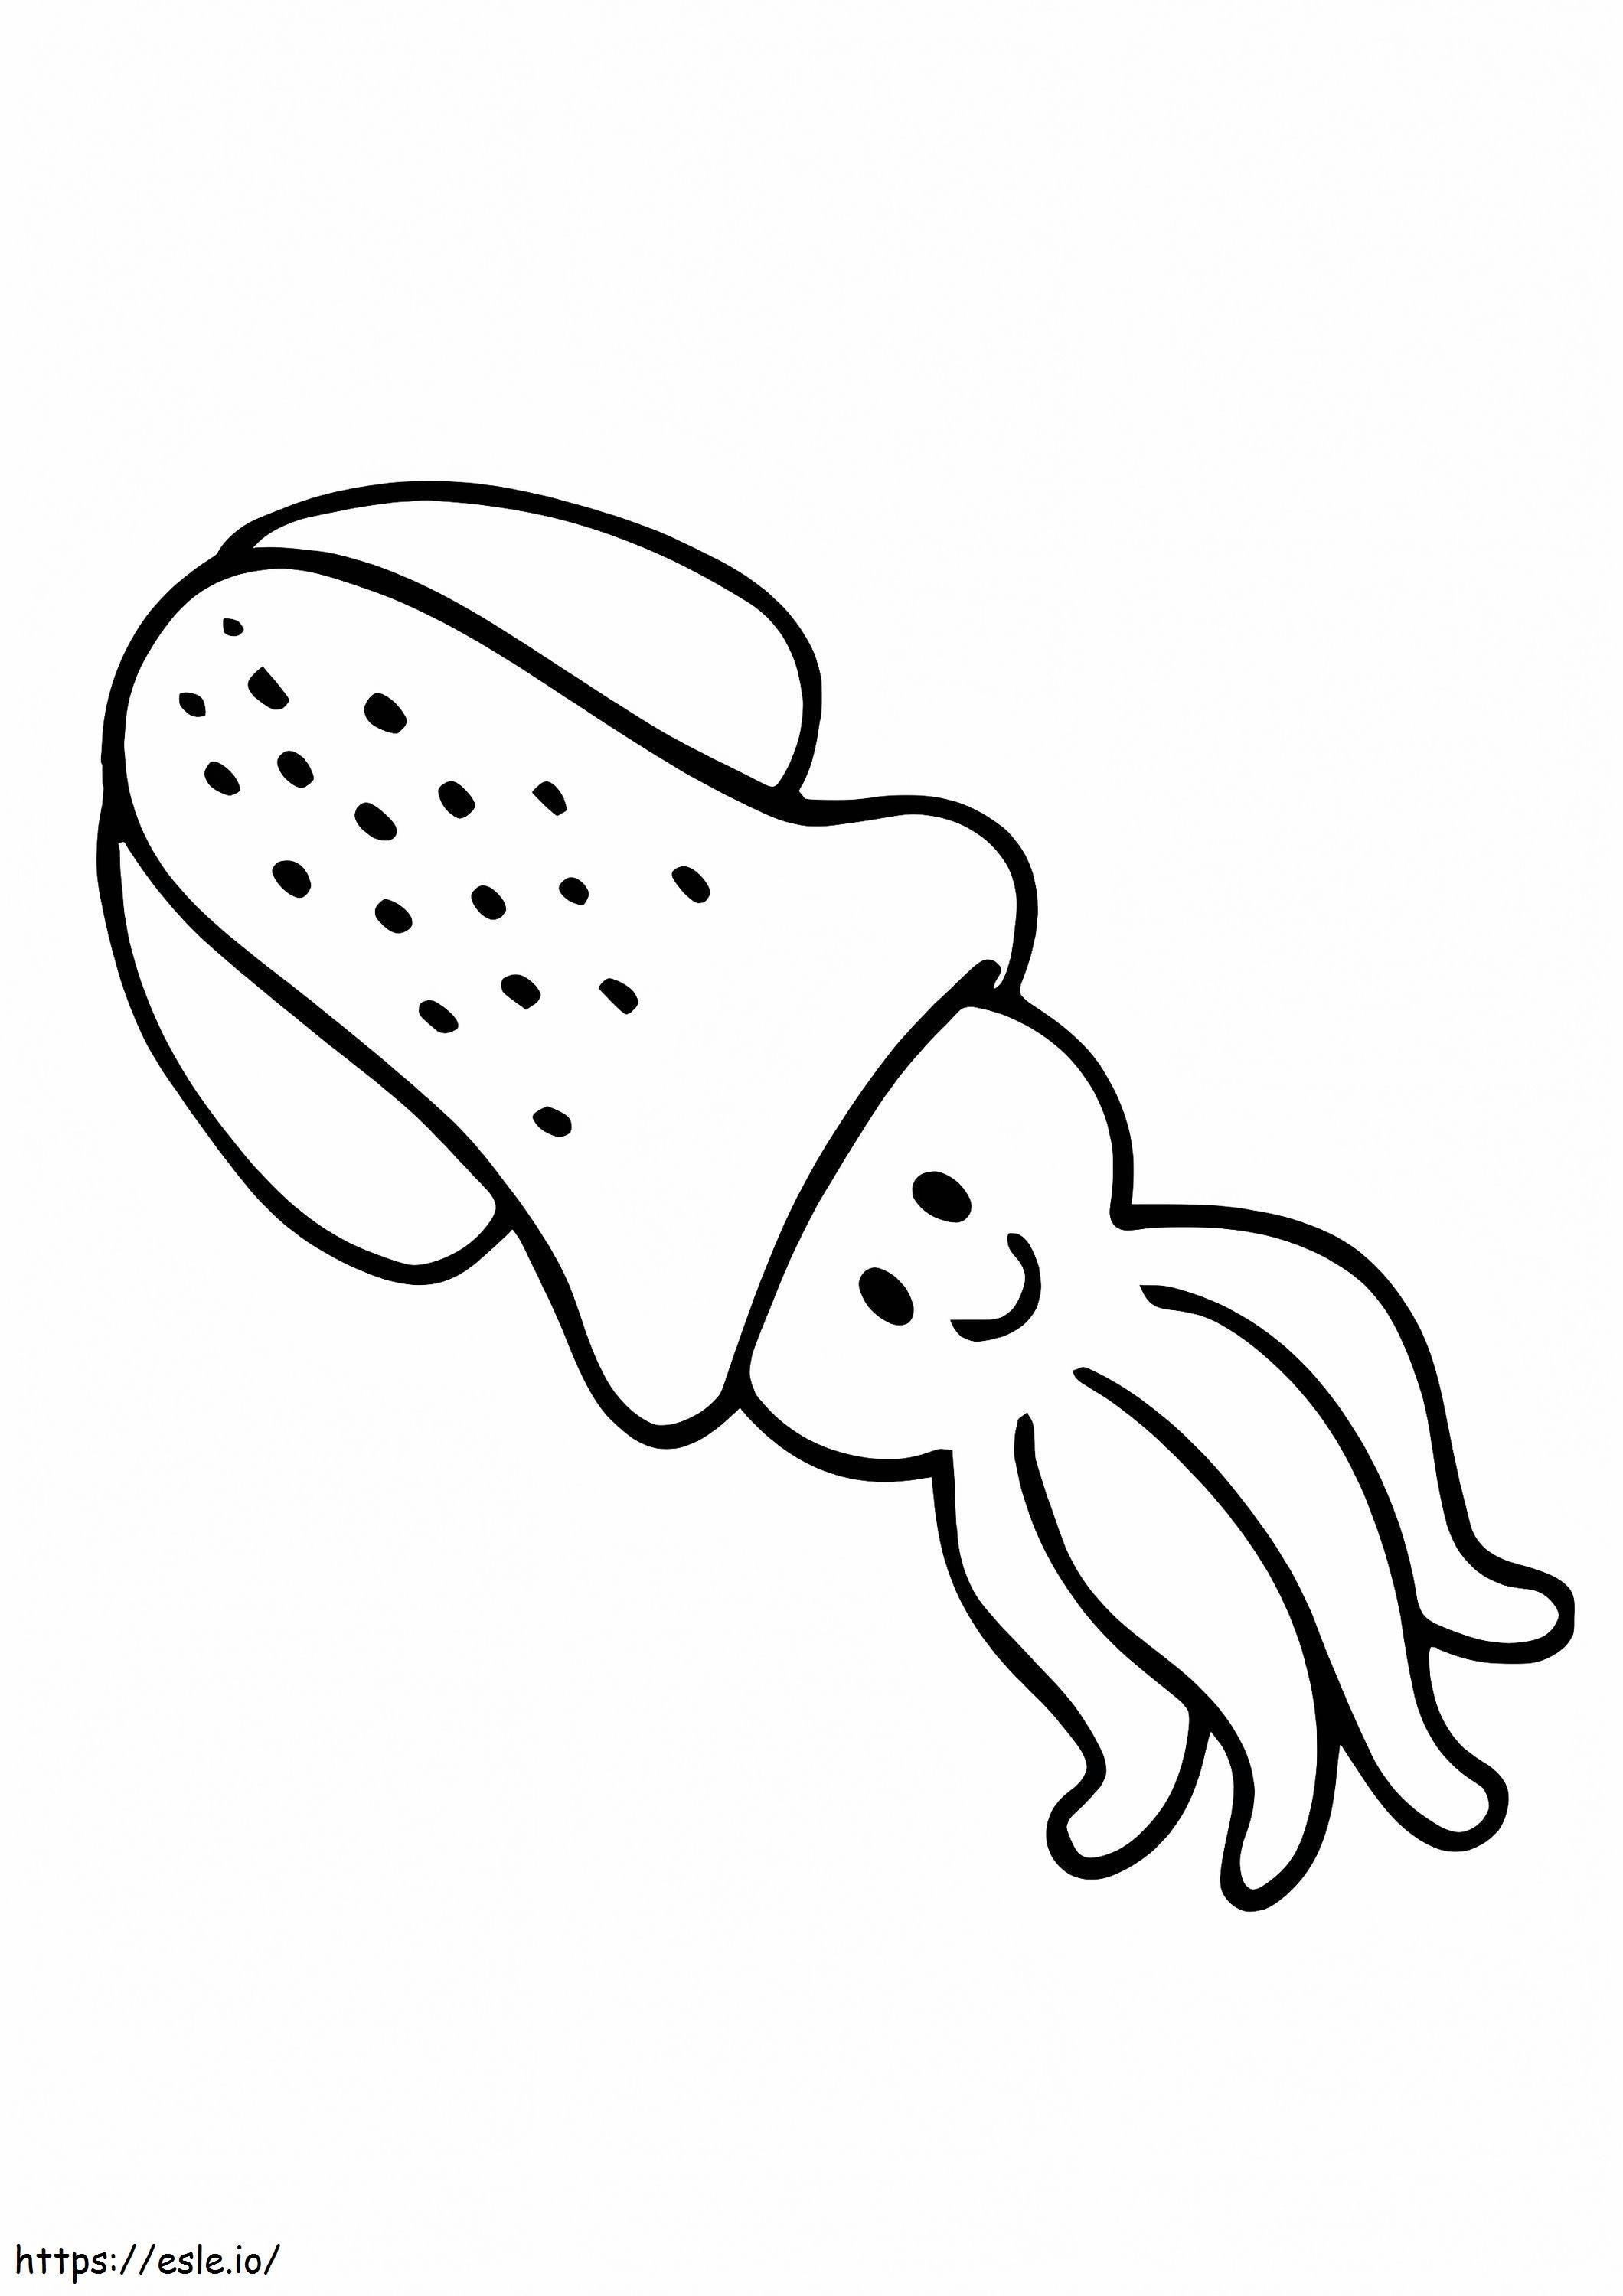 Cute Smiling Squid coloring page